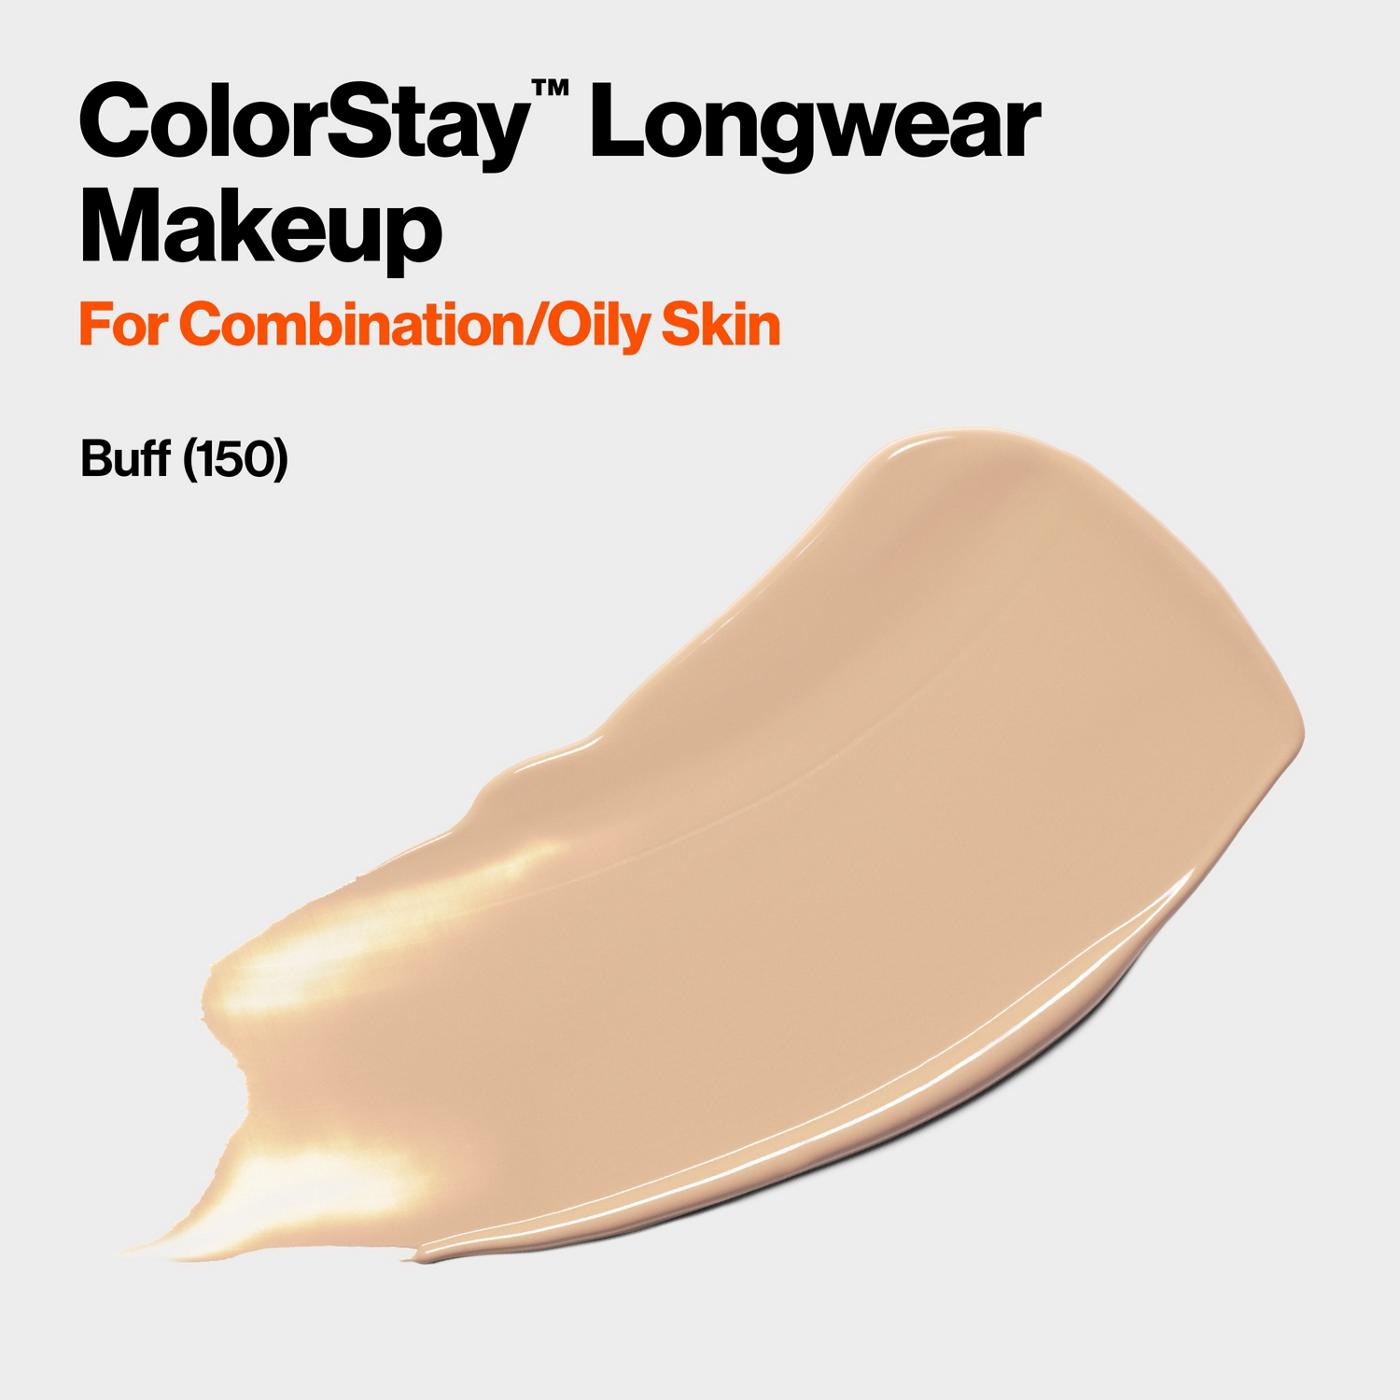 Revlon ColorStay Foundation for Combination/Oily Skin, 150 Buff; image 6 of 6